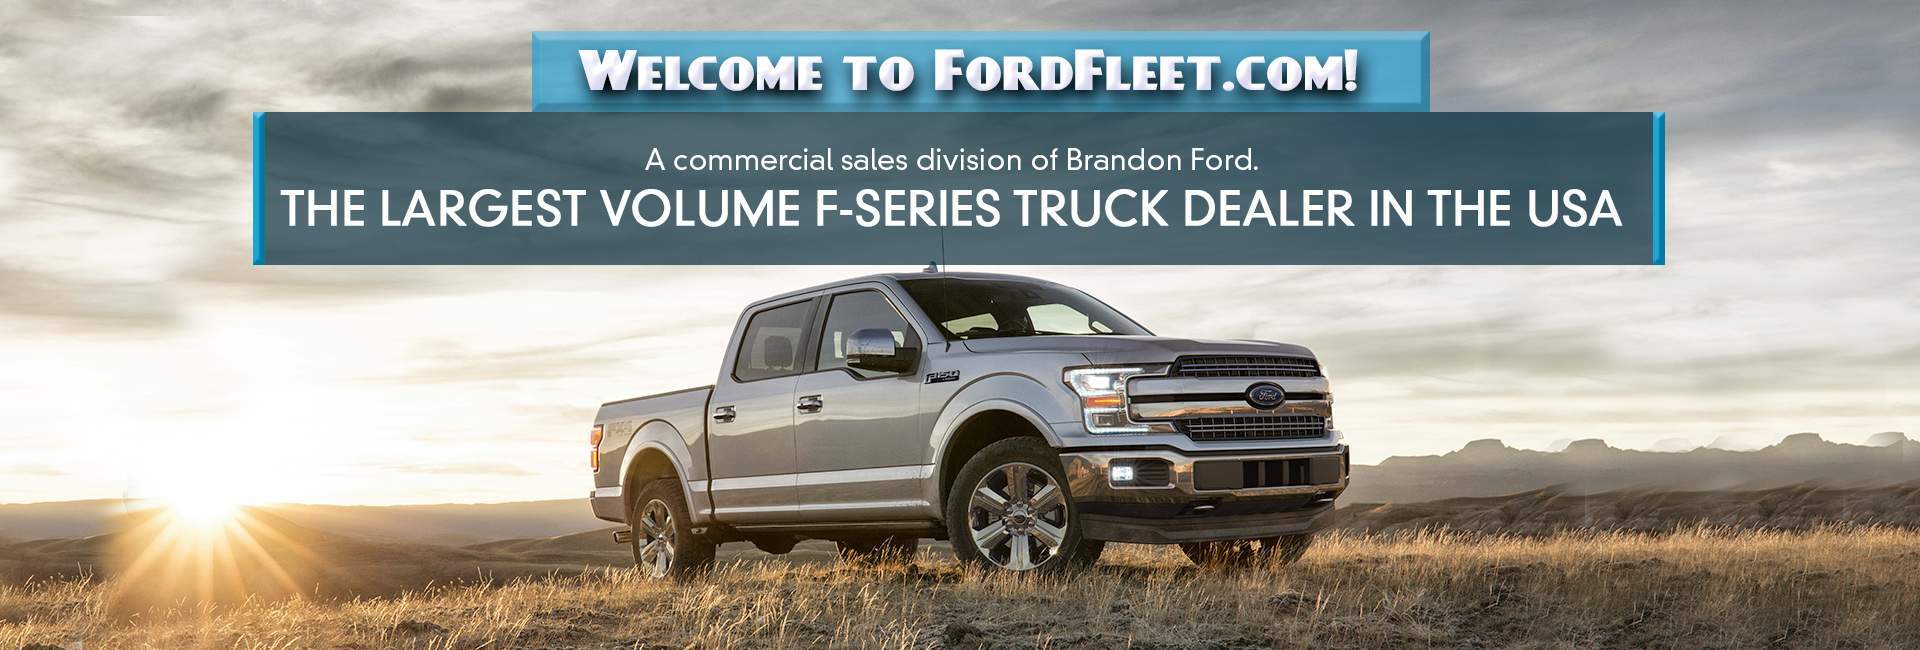 Brandon Ford is largest seller of F-Series Trucks in the USA